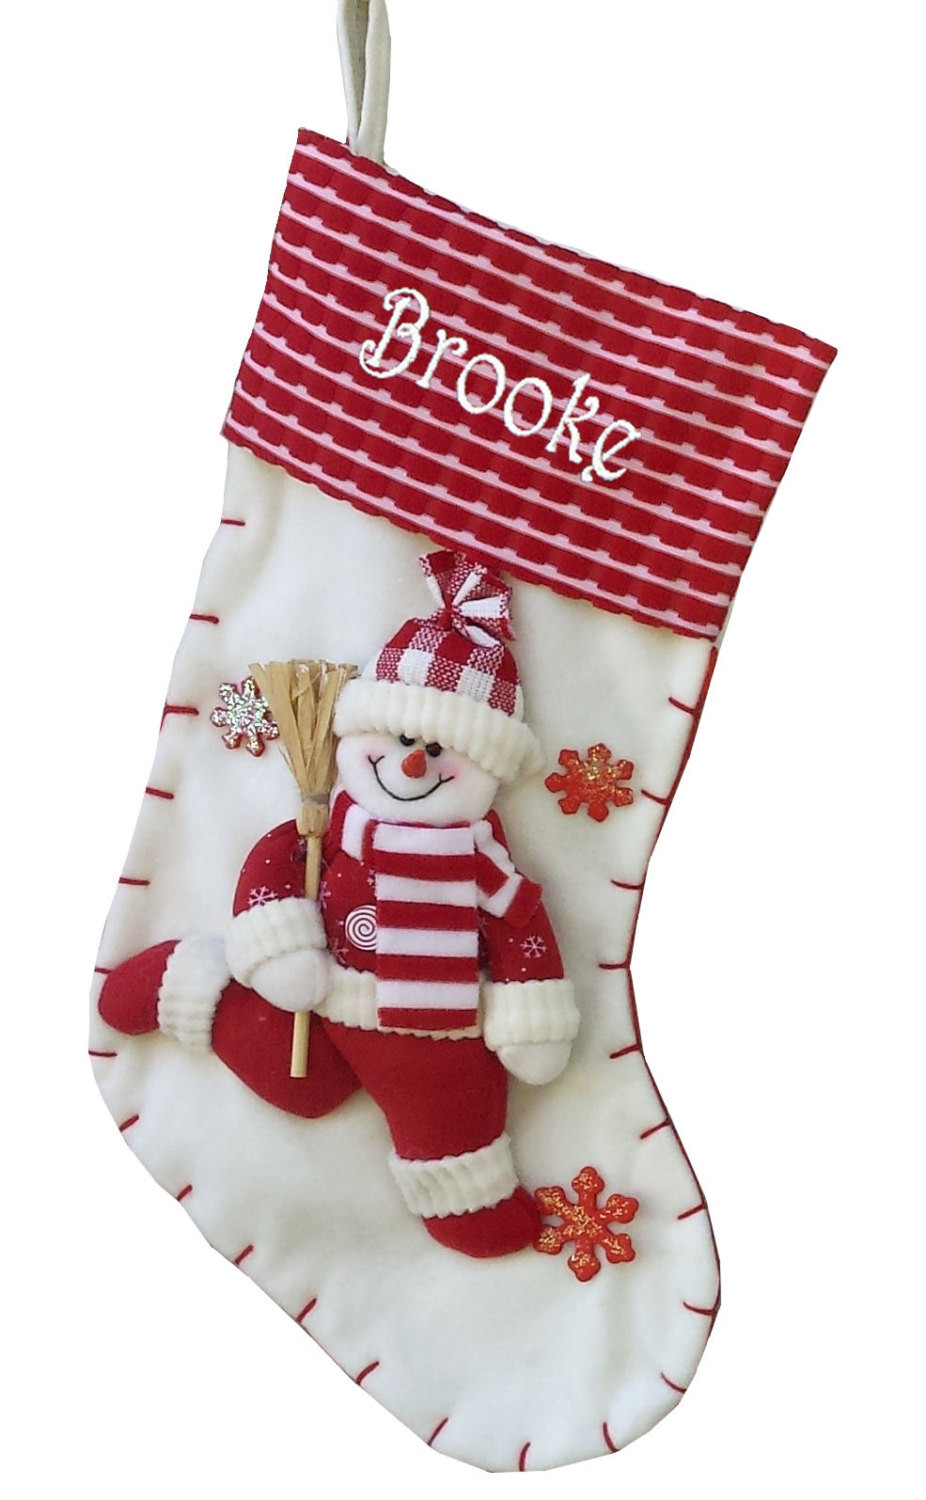 Candy Cane Christmas Stockings
 19" Red and White Candy Cane Like Snowman Christmas Stocking